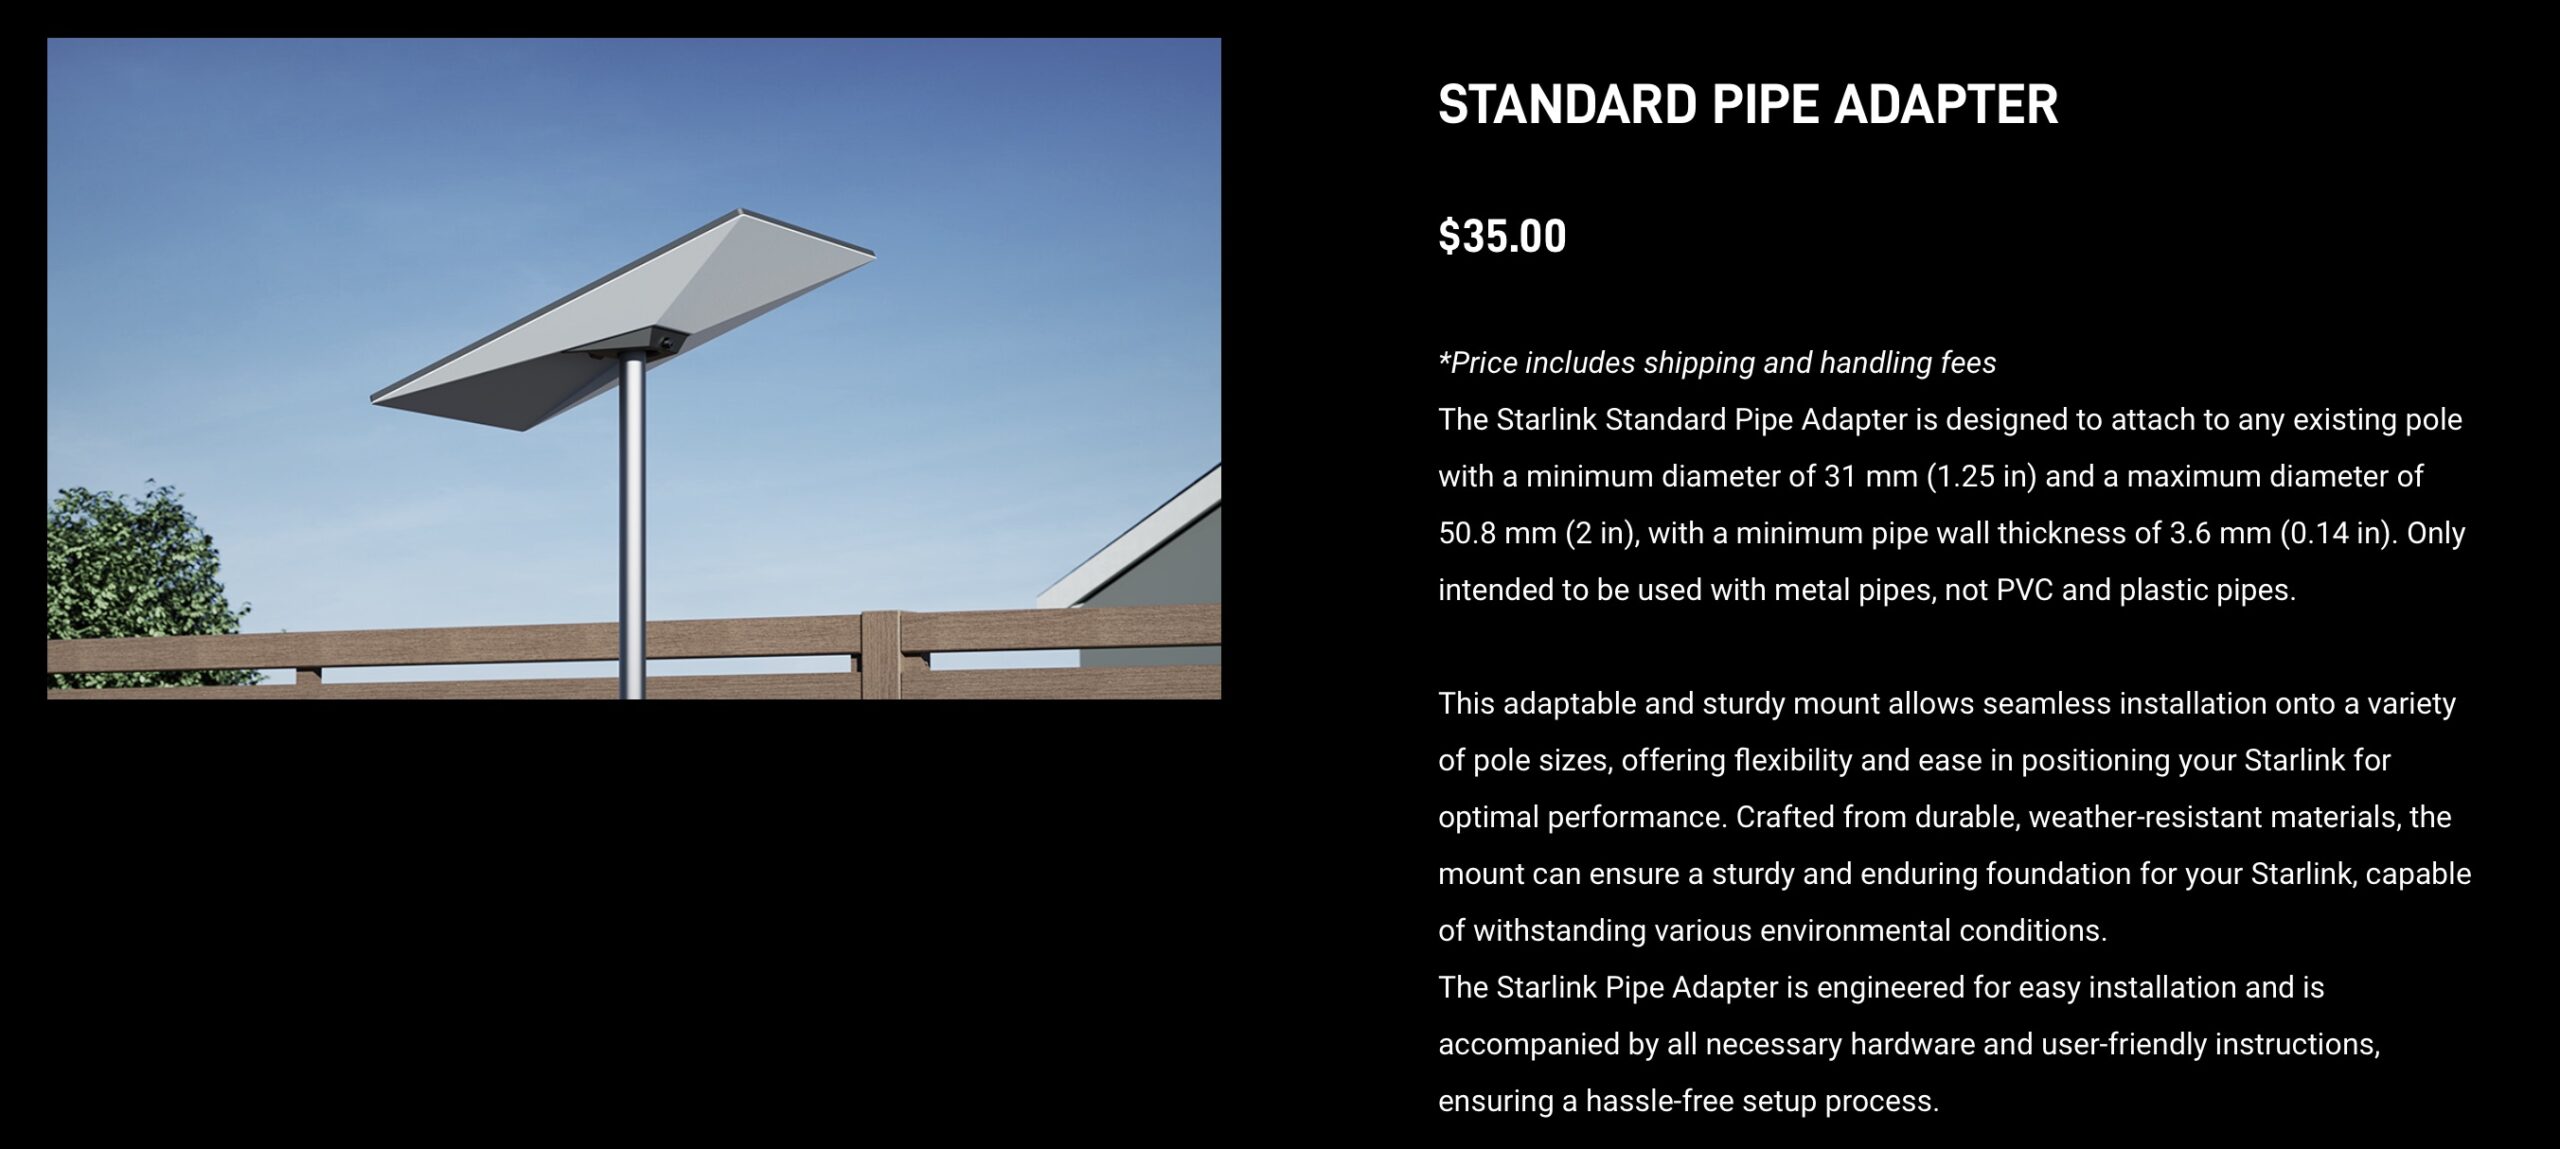 Starlink Standard Pipe Adapter product page